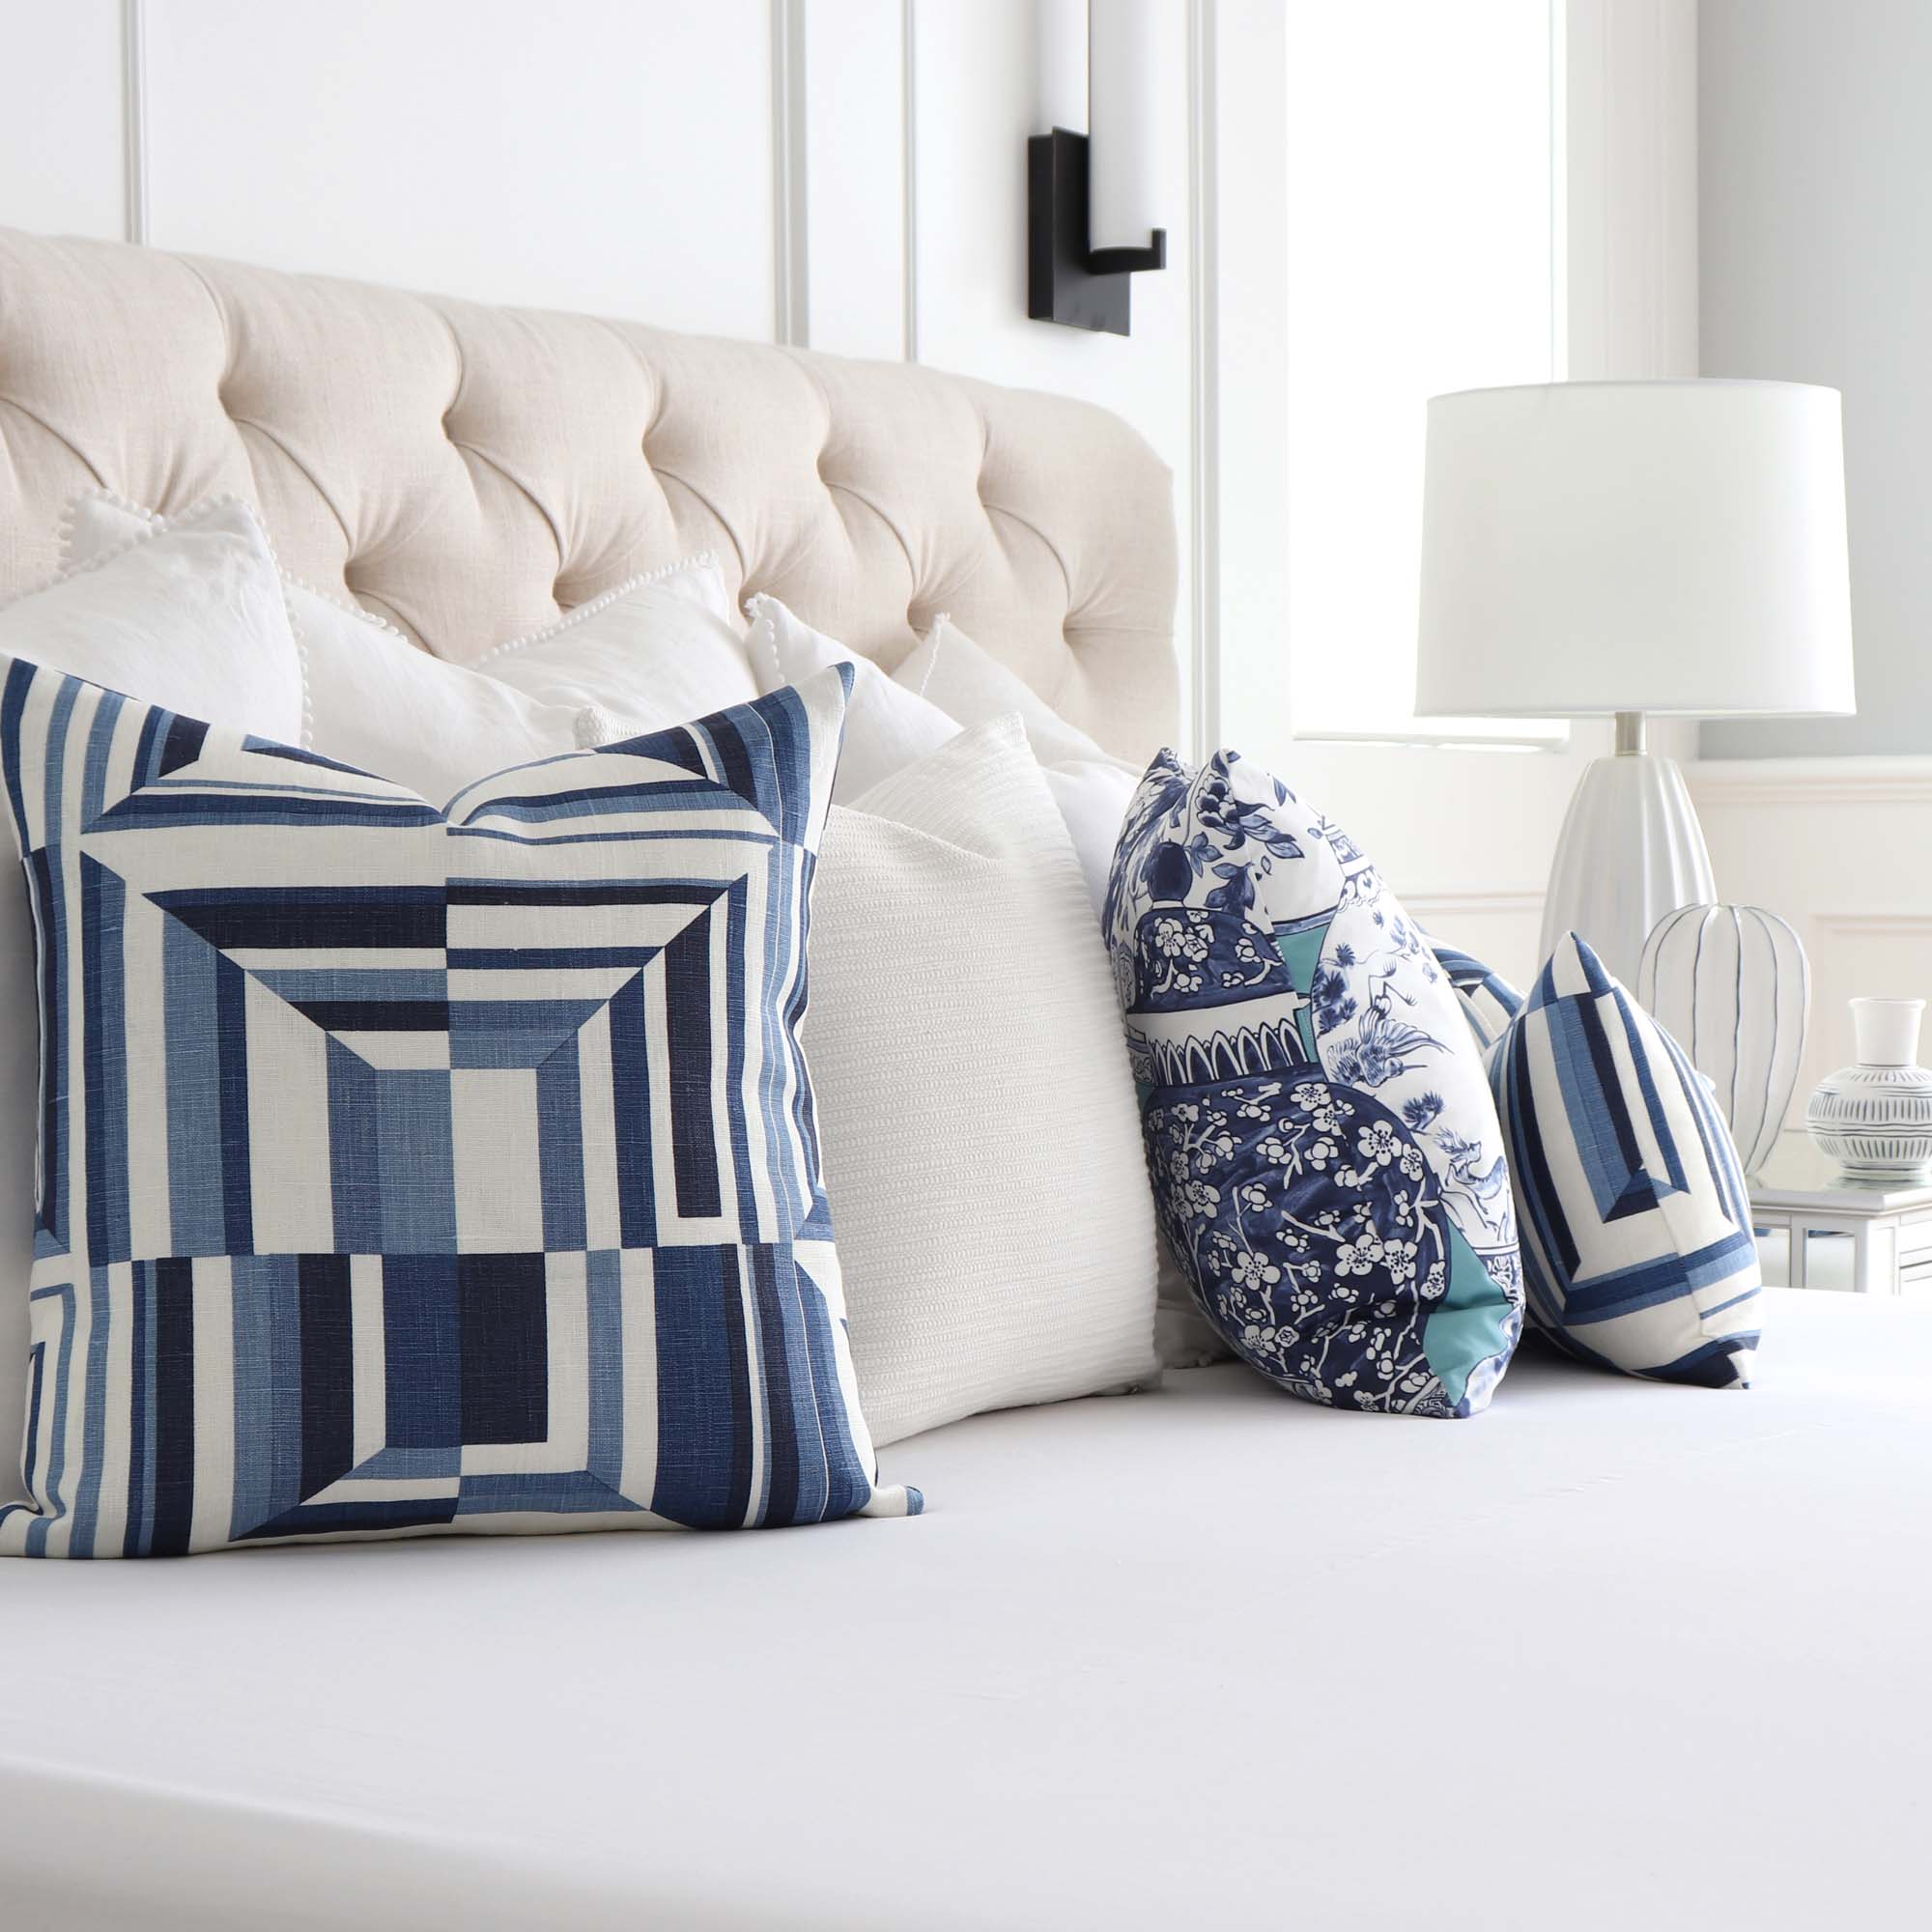 Thibaut Cubism Geometric Blue and White Stripes Linen Designer Luxury Decorative Throw Pillow Cover in Bedroom with Matching Pillows